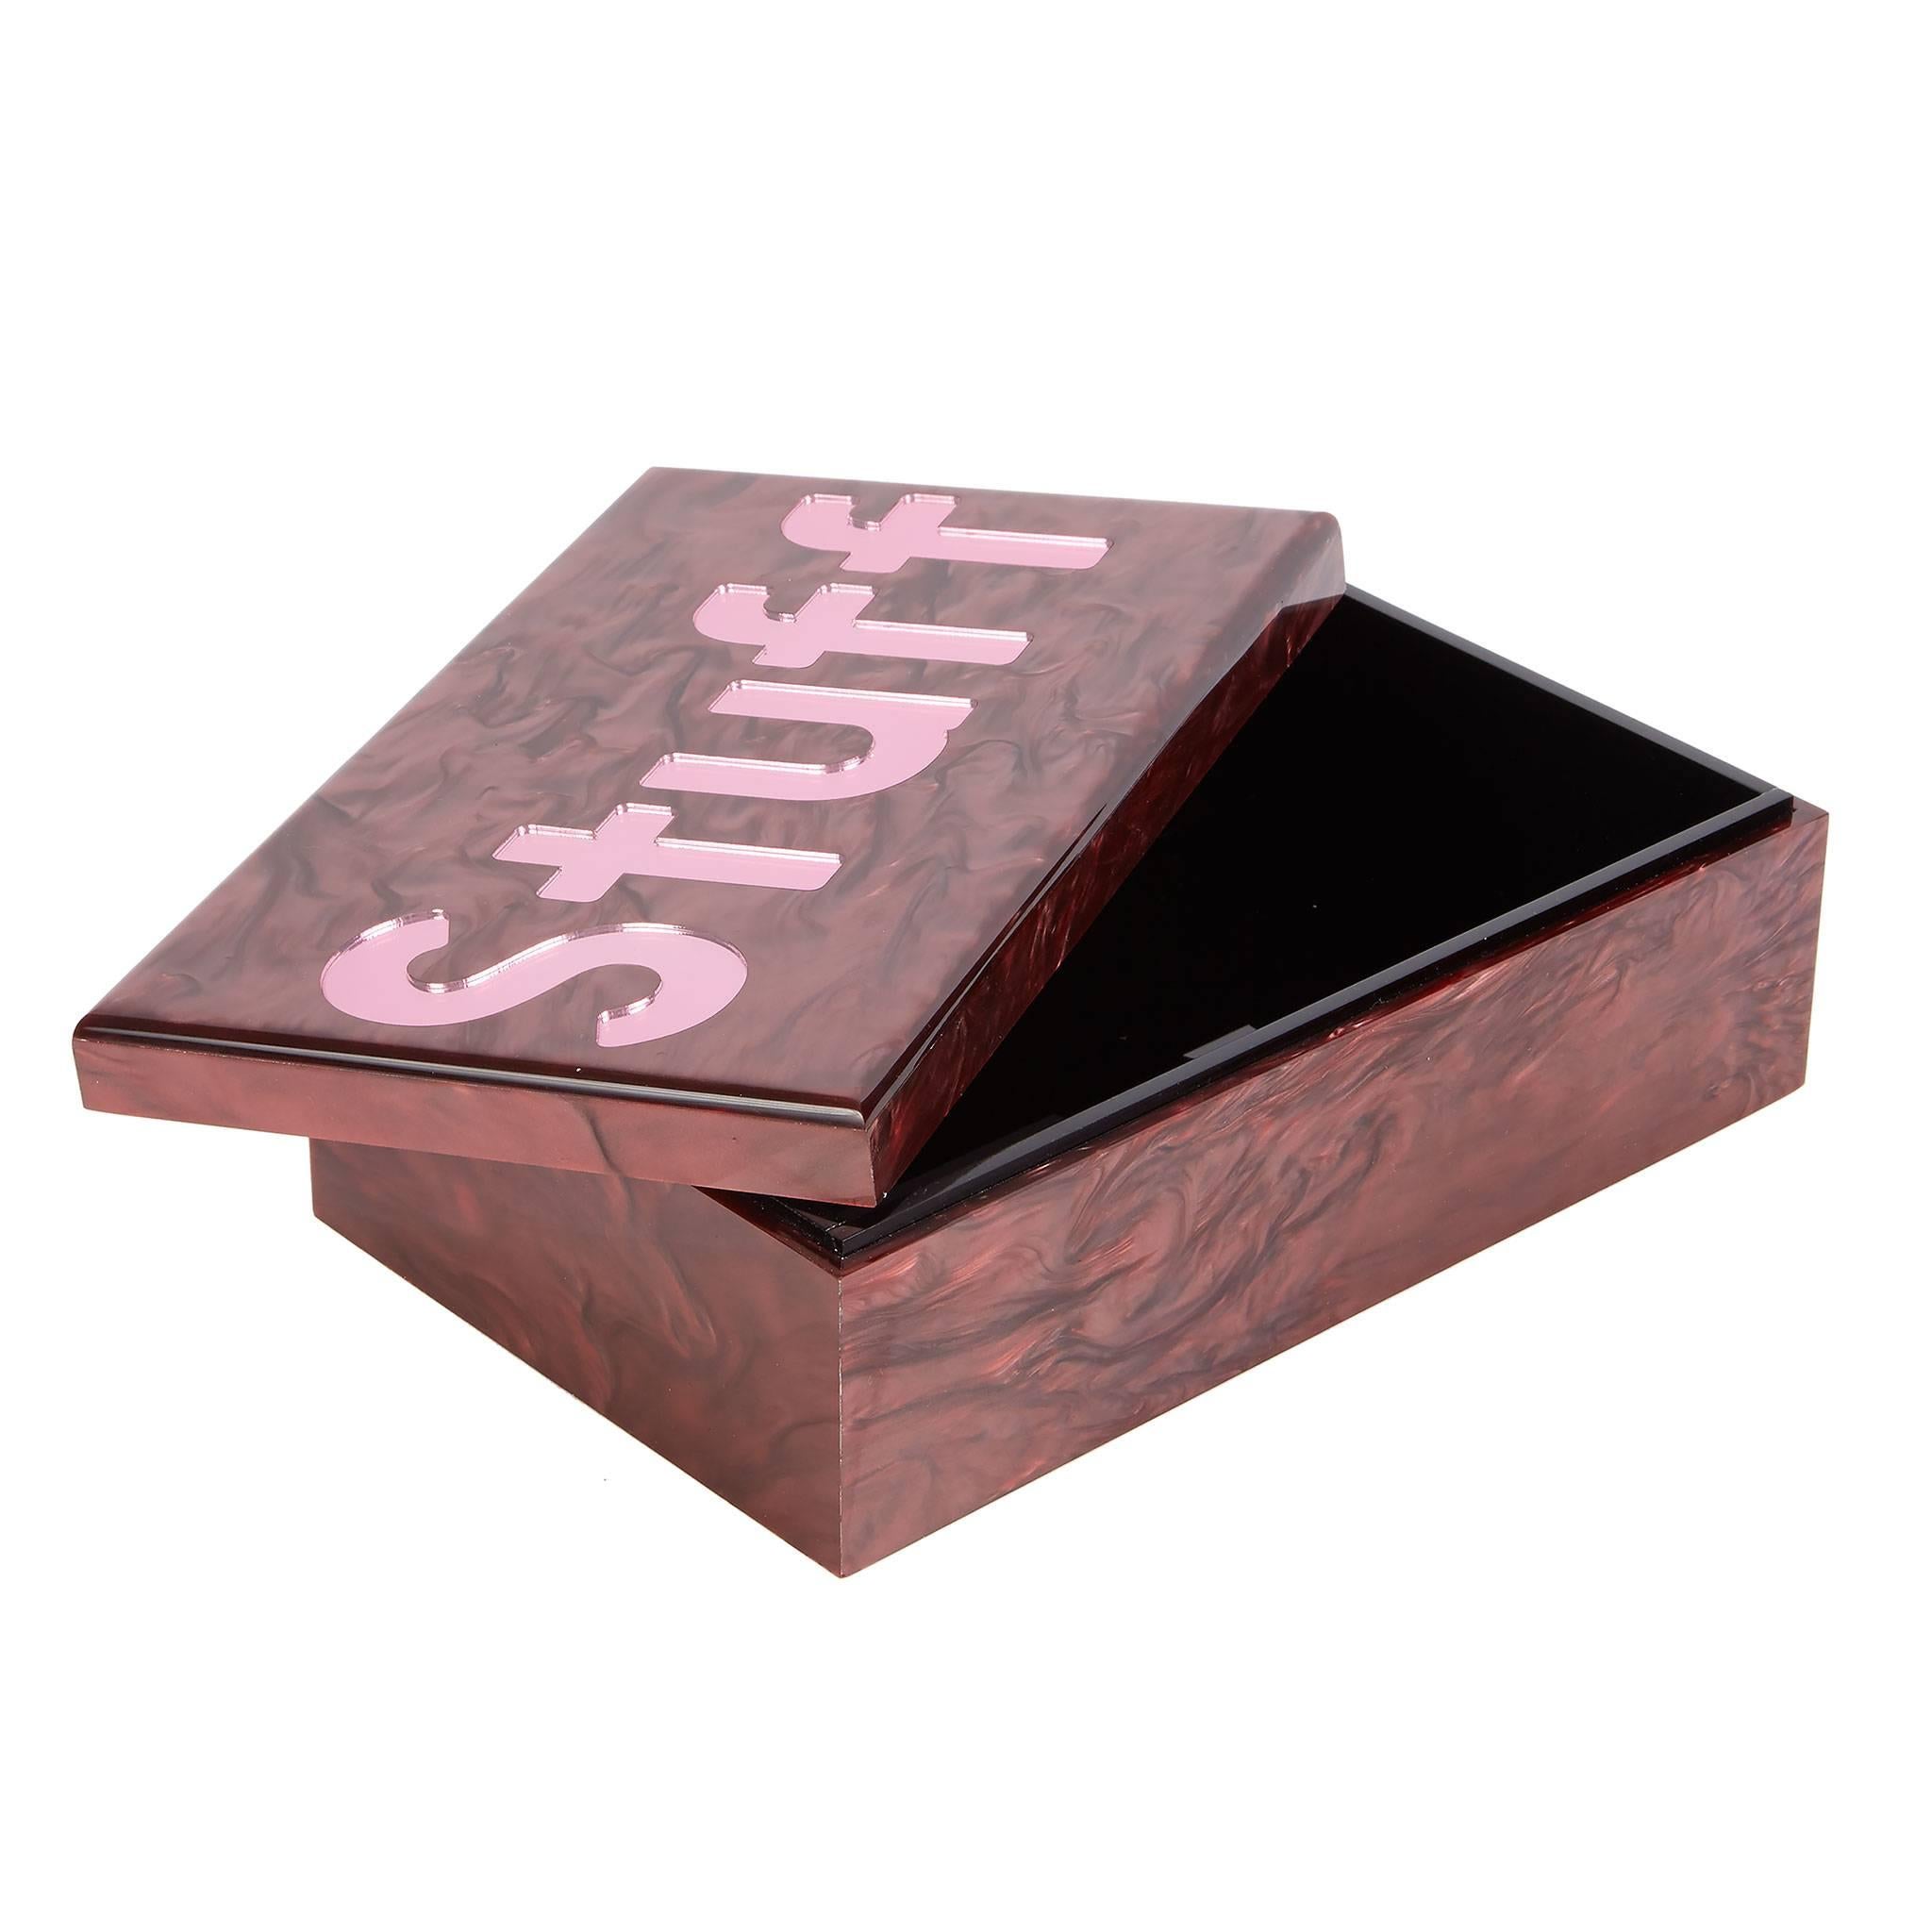 Edie Parker Stuff Box in raisin pearlescent with pink mirror block text and black interior.

100% hand poured acrylic
Etched logo on bottom
Ships in a gift box
Handmade in America

Edie Parker products are handcrafted of the finest materials